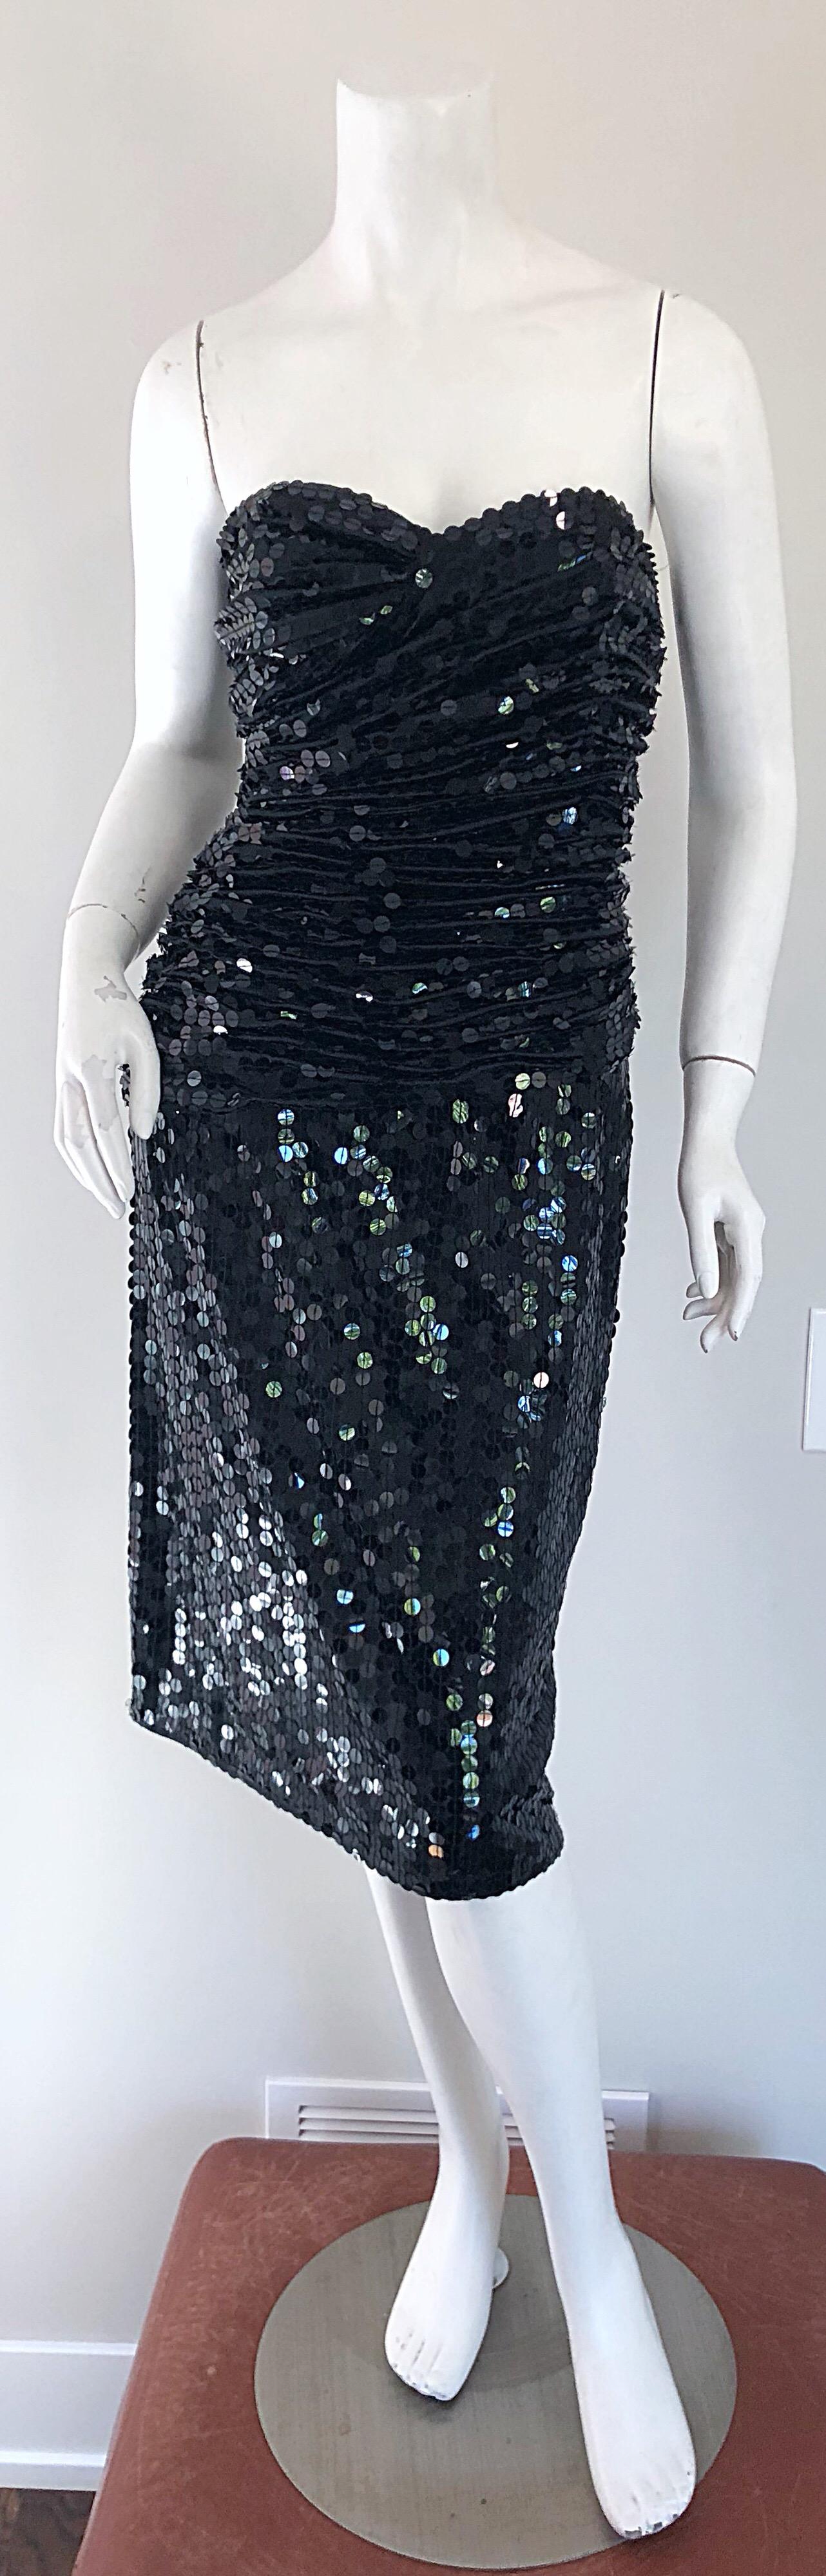 Stunning vintage late 80s VICKY TIEL COUTURE black silk strapless cocktail dress! Features thousands of hand-sewn black sequins throughout. Flattering ruched boned bodice offers plenty of stretch. Flirty skirt is perfect for dancing! Hidden zipper